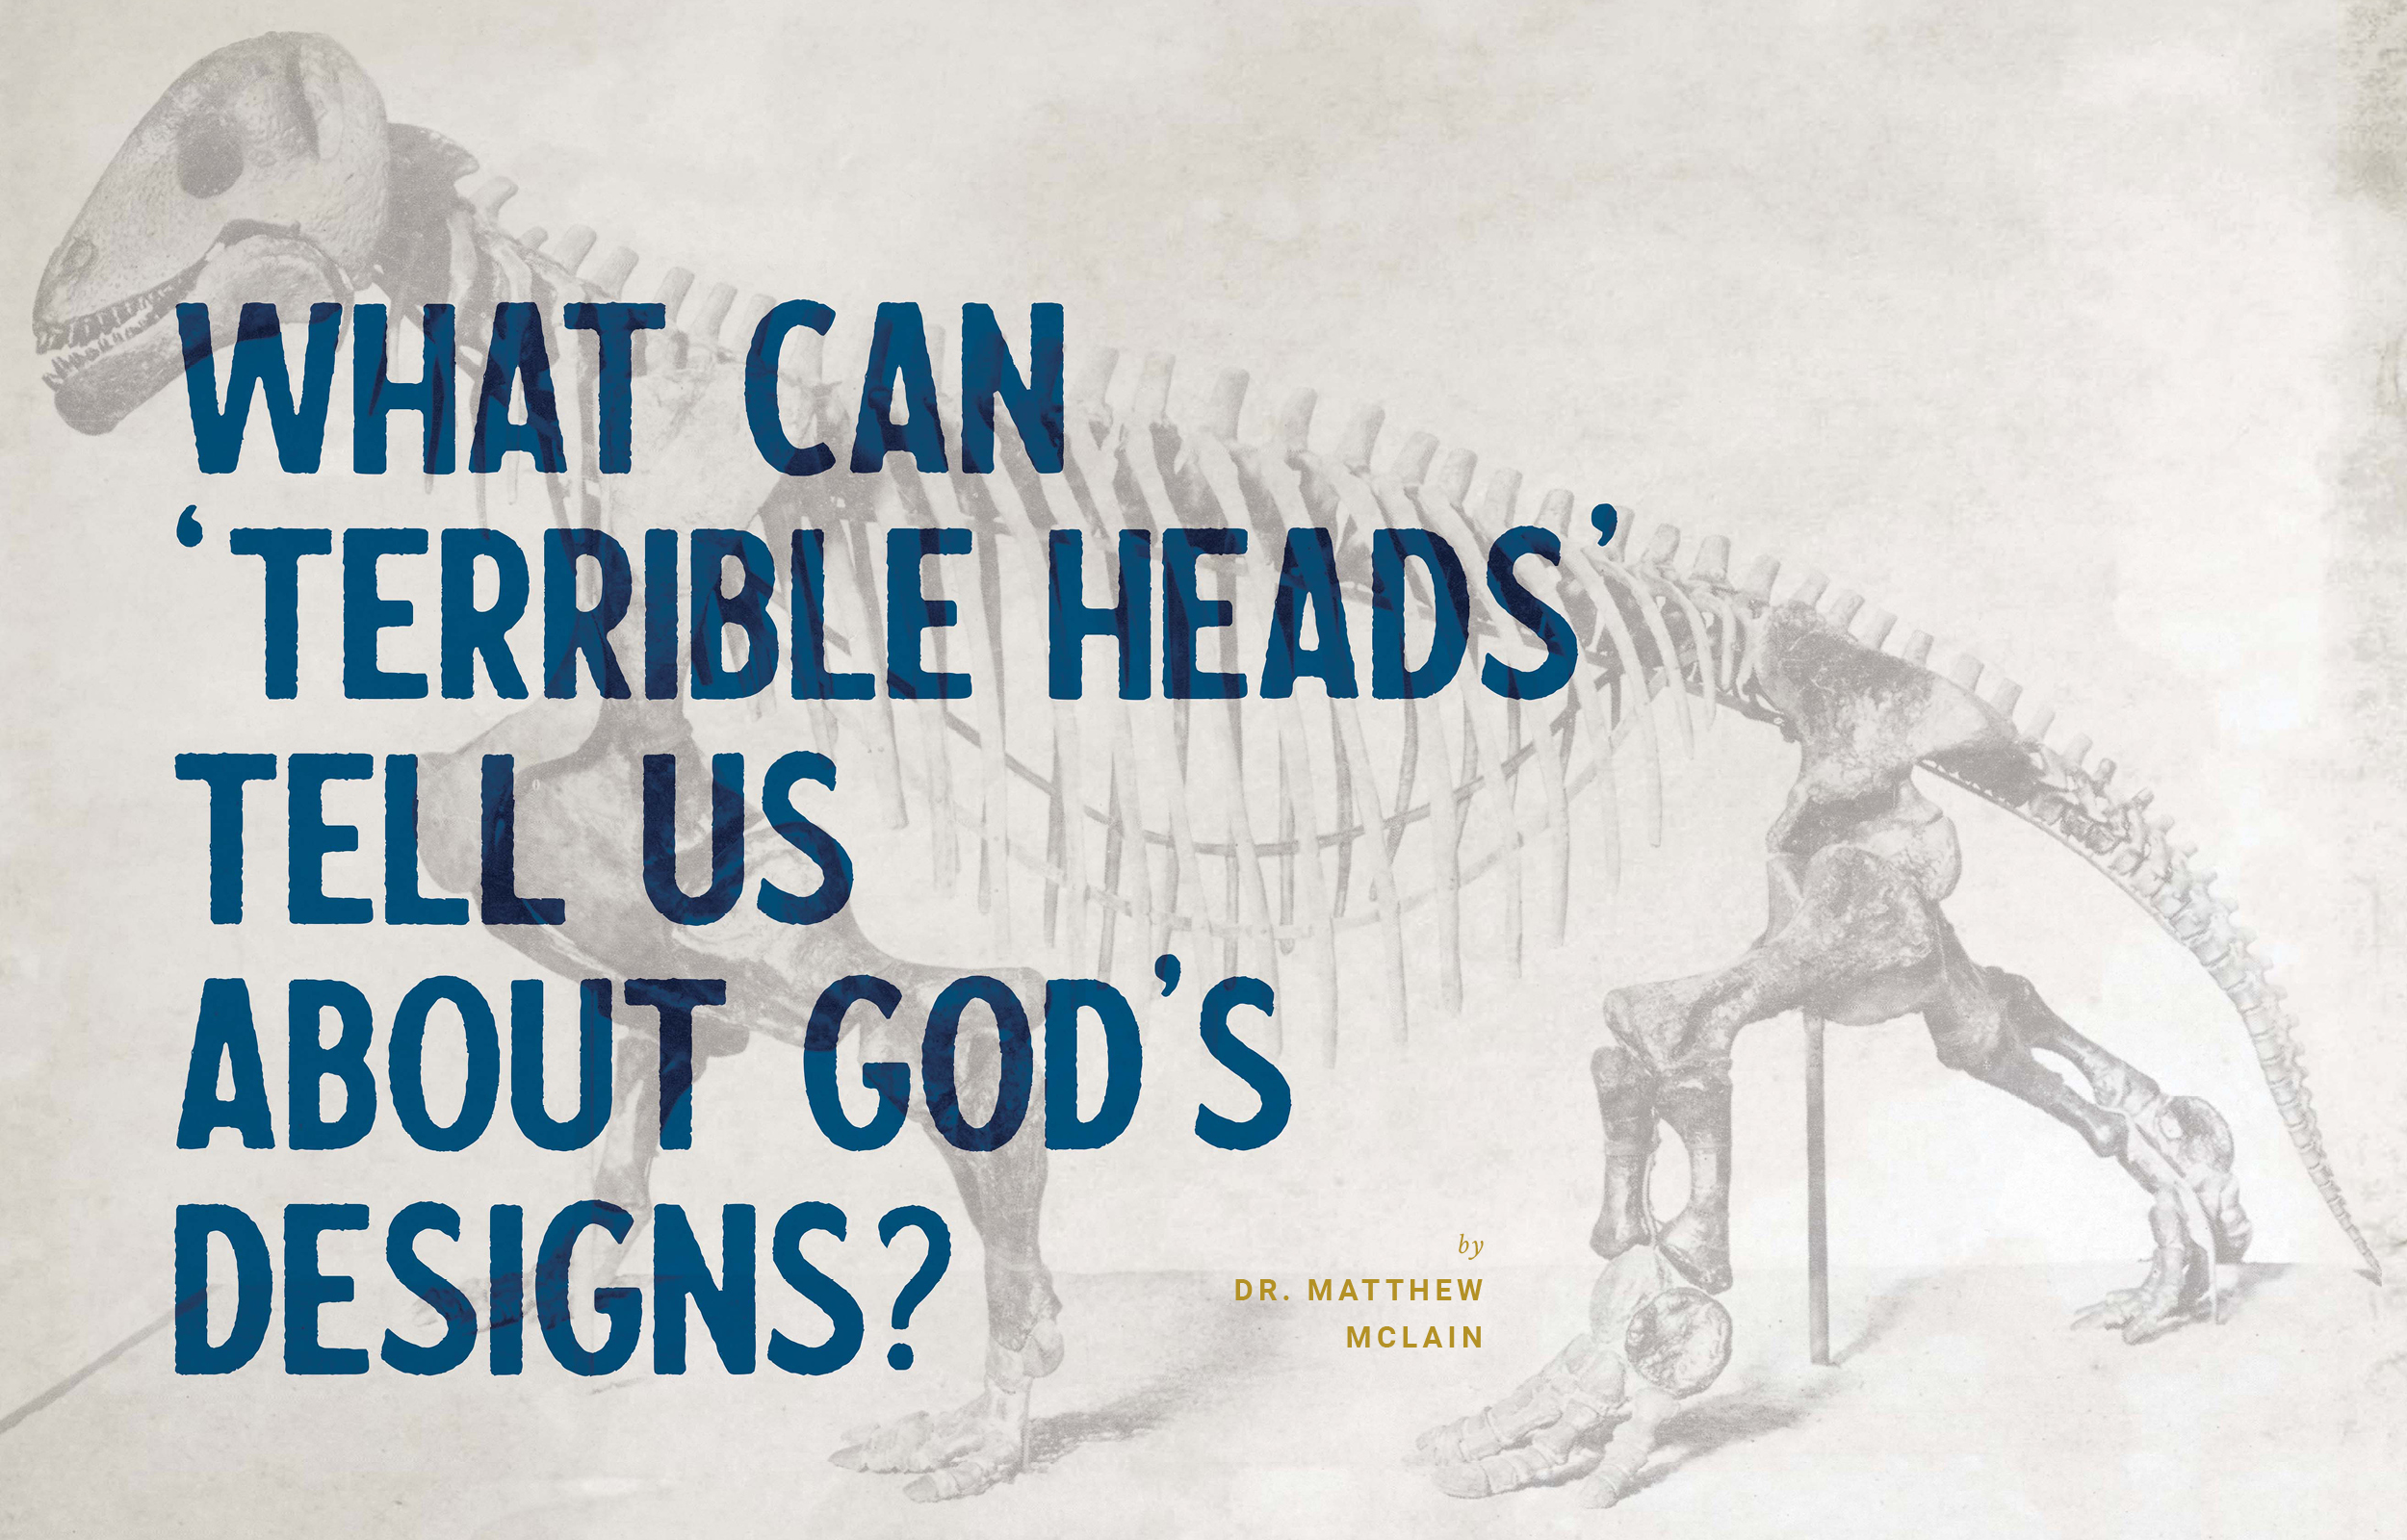 What Can 'Terrible Heads' Tell us About God's Designs? image